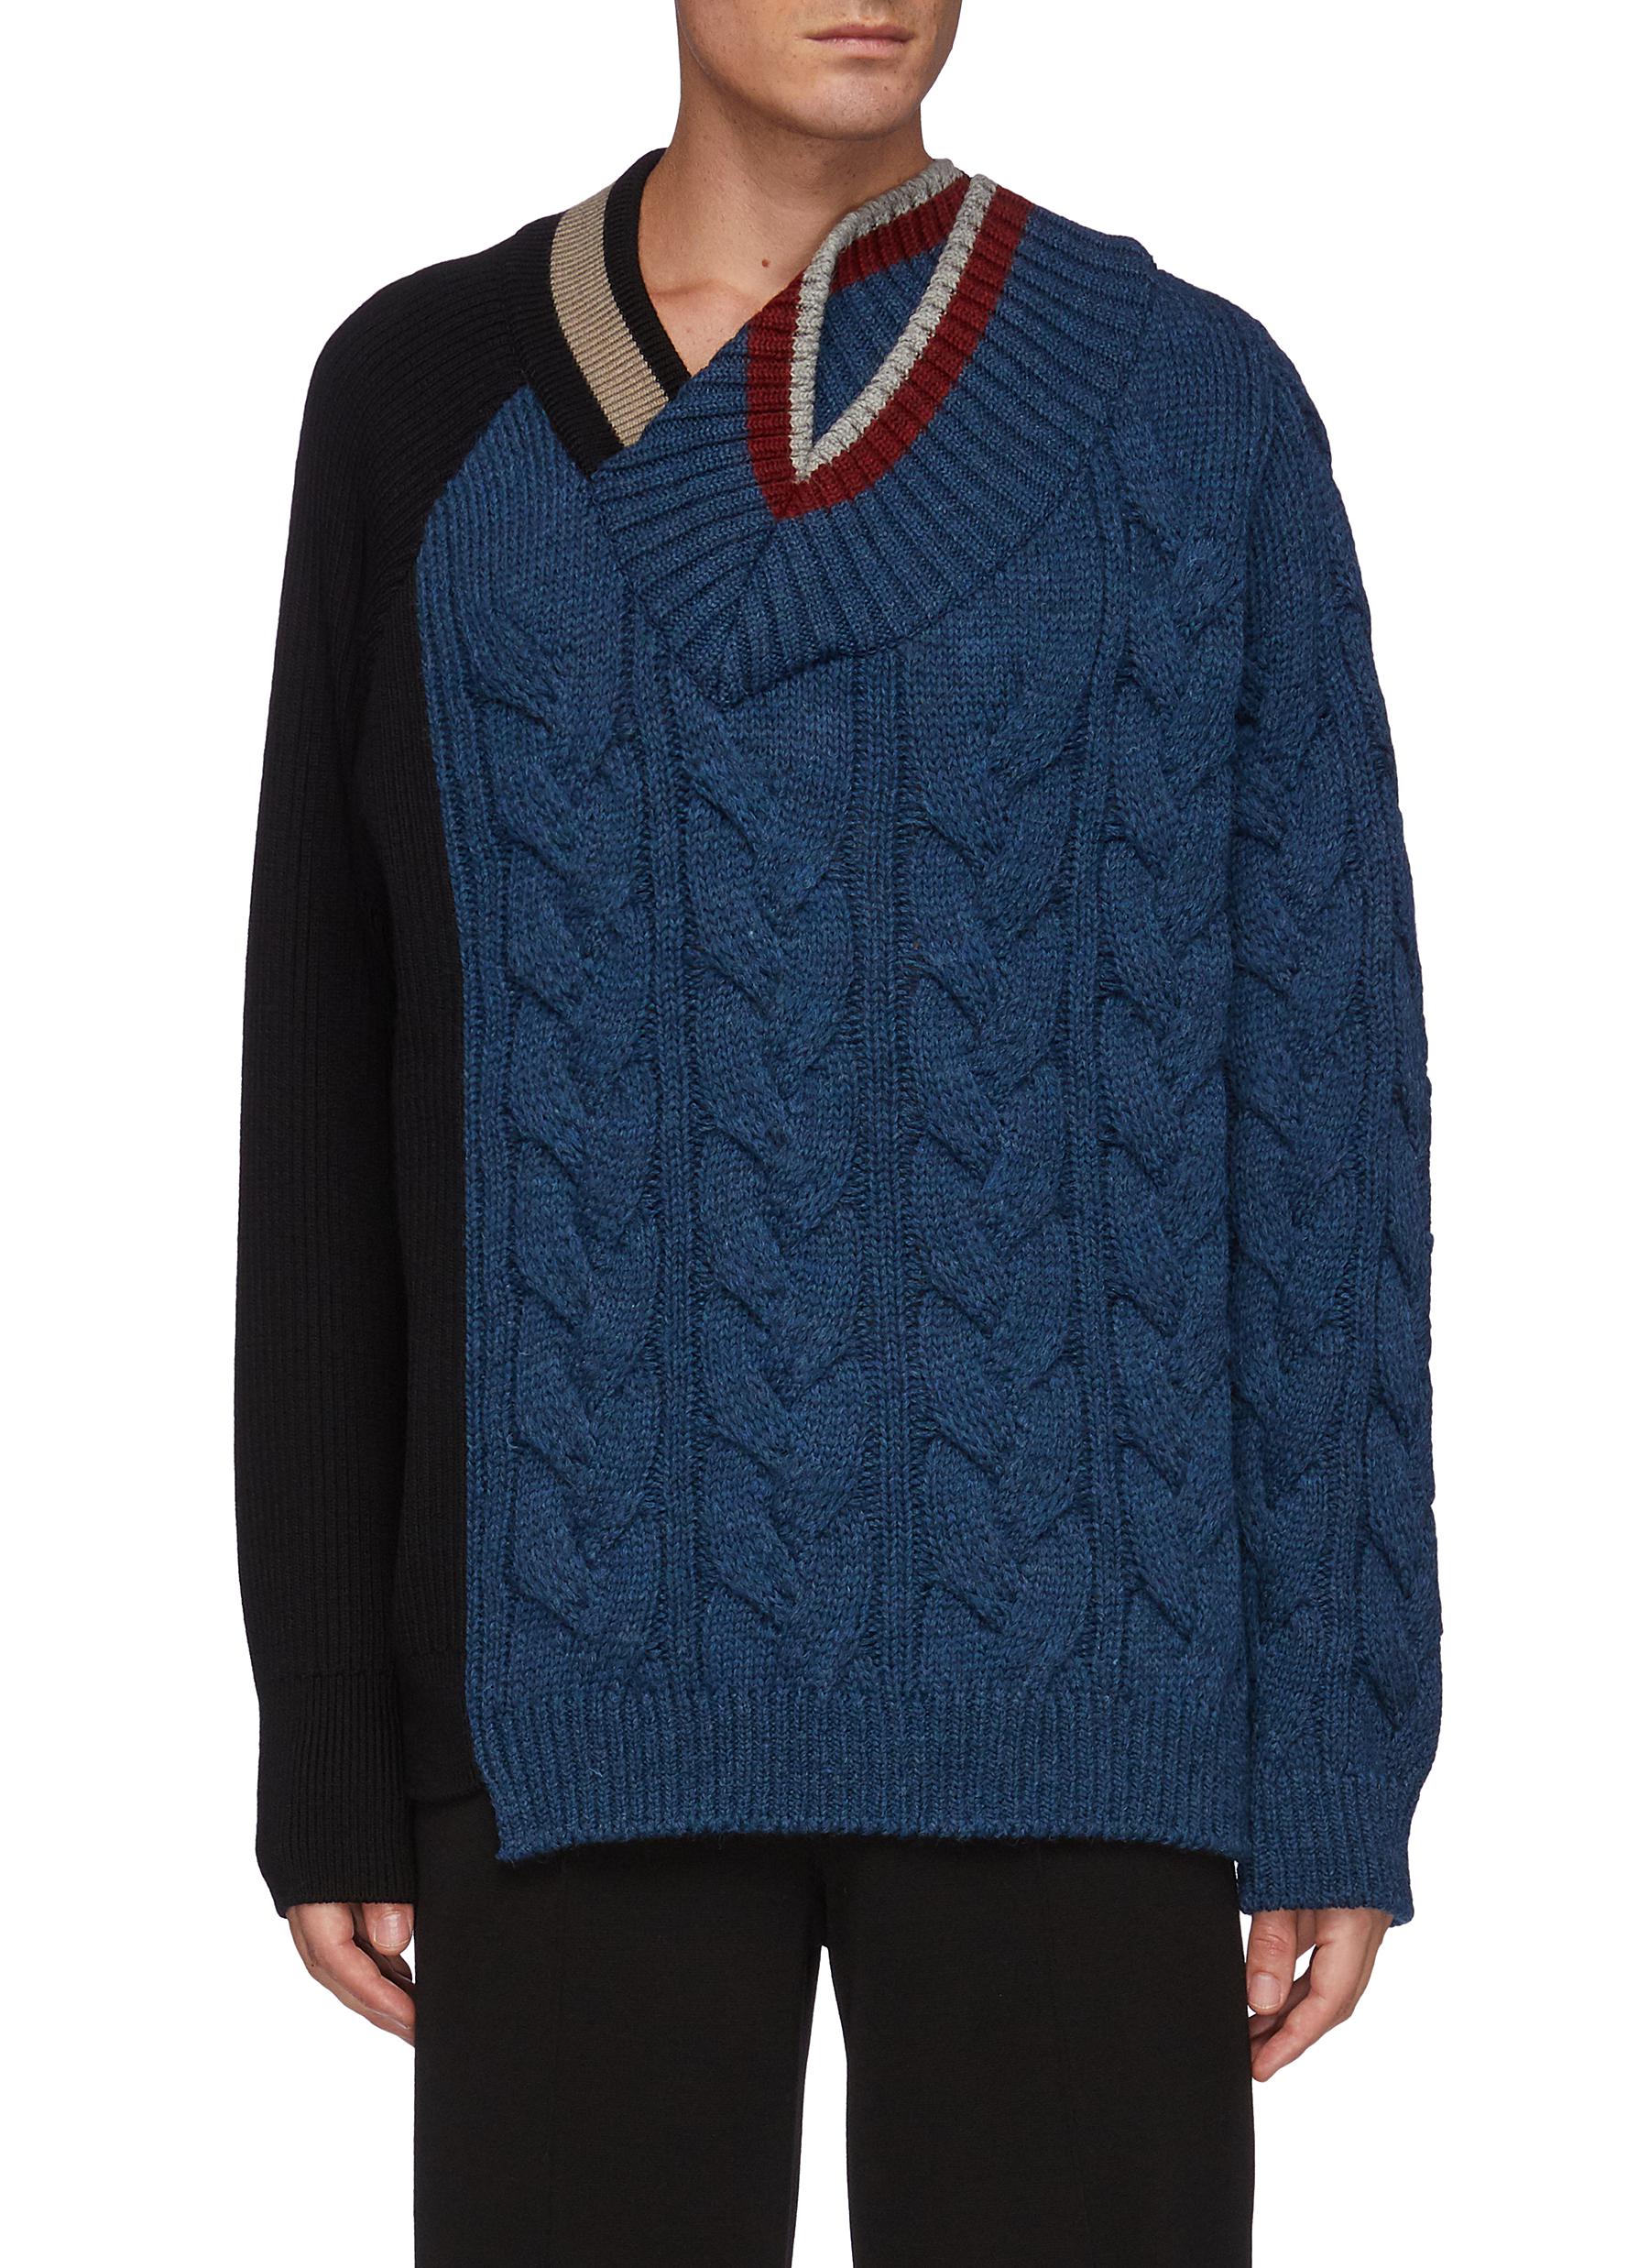 Asymmetric Cable Wool Knit Sweater